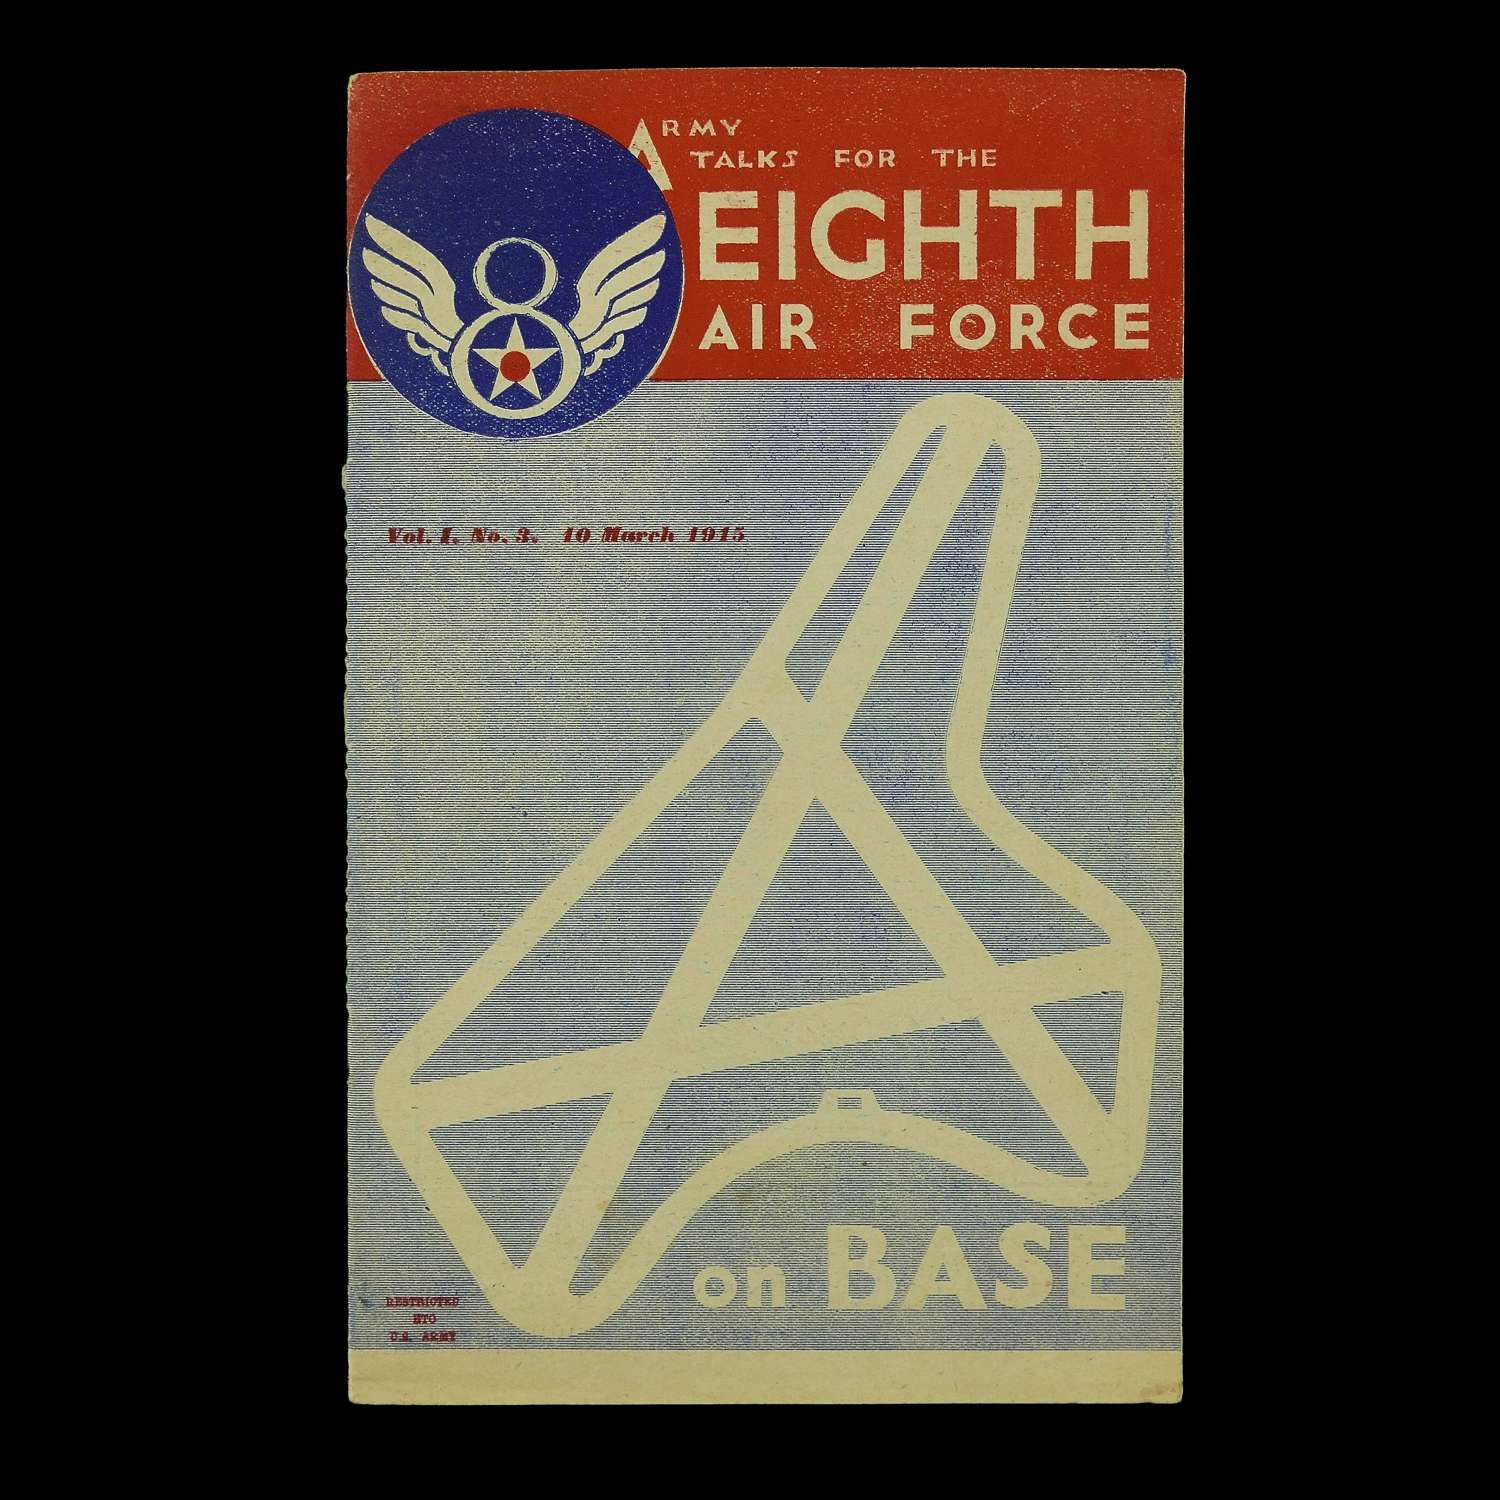 'On Base' Army Talks For The Eighth Air Force